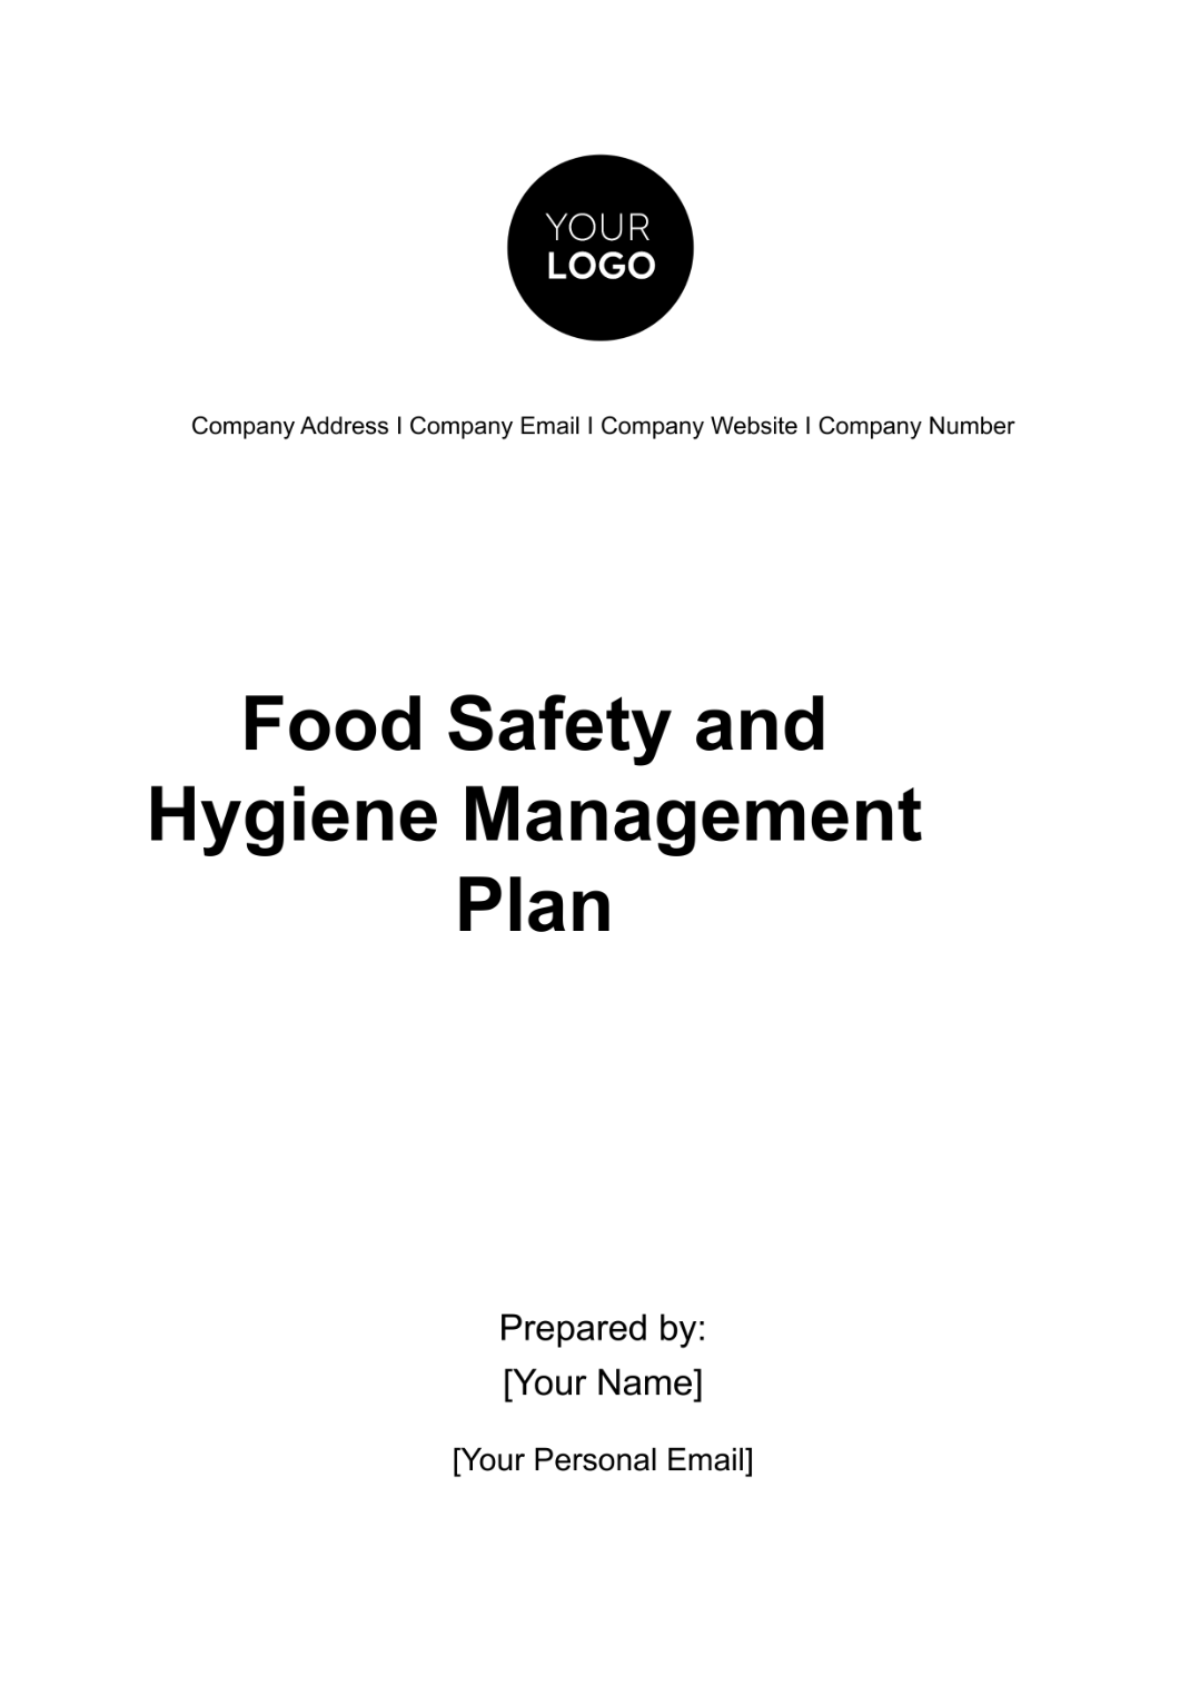 Free Food Safety and Hygiene Management Plan HR Template